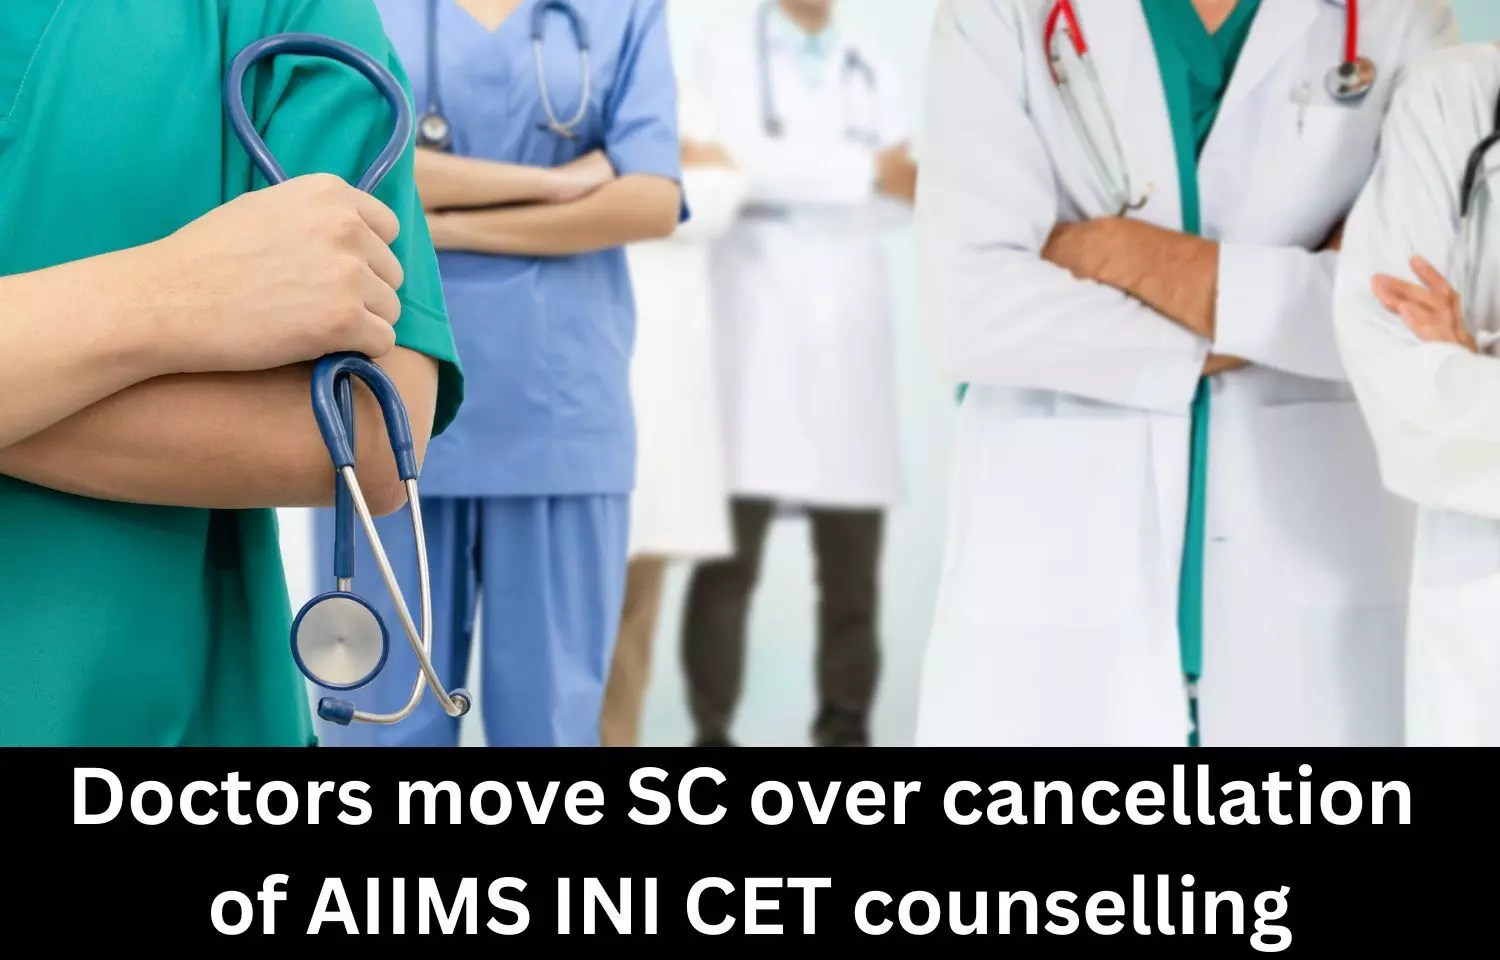 Doctors move SC over cancellation of AIIMS INI CET counselling